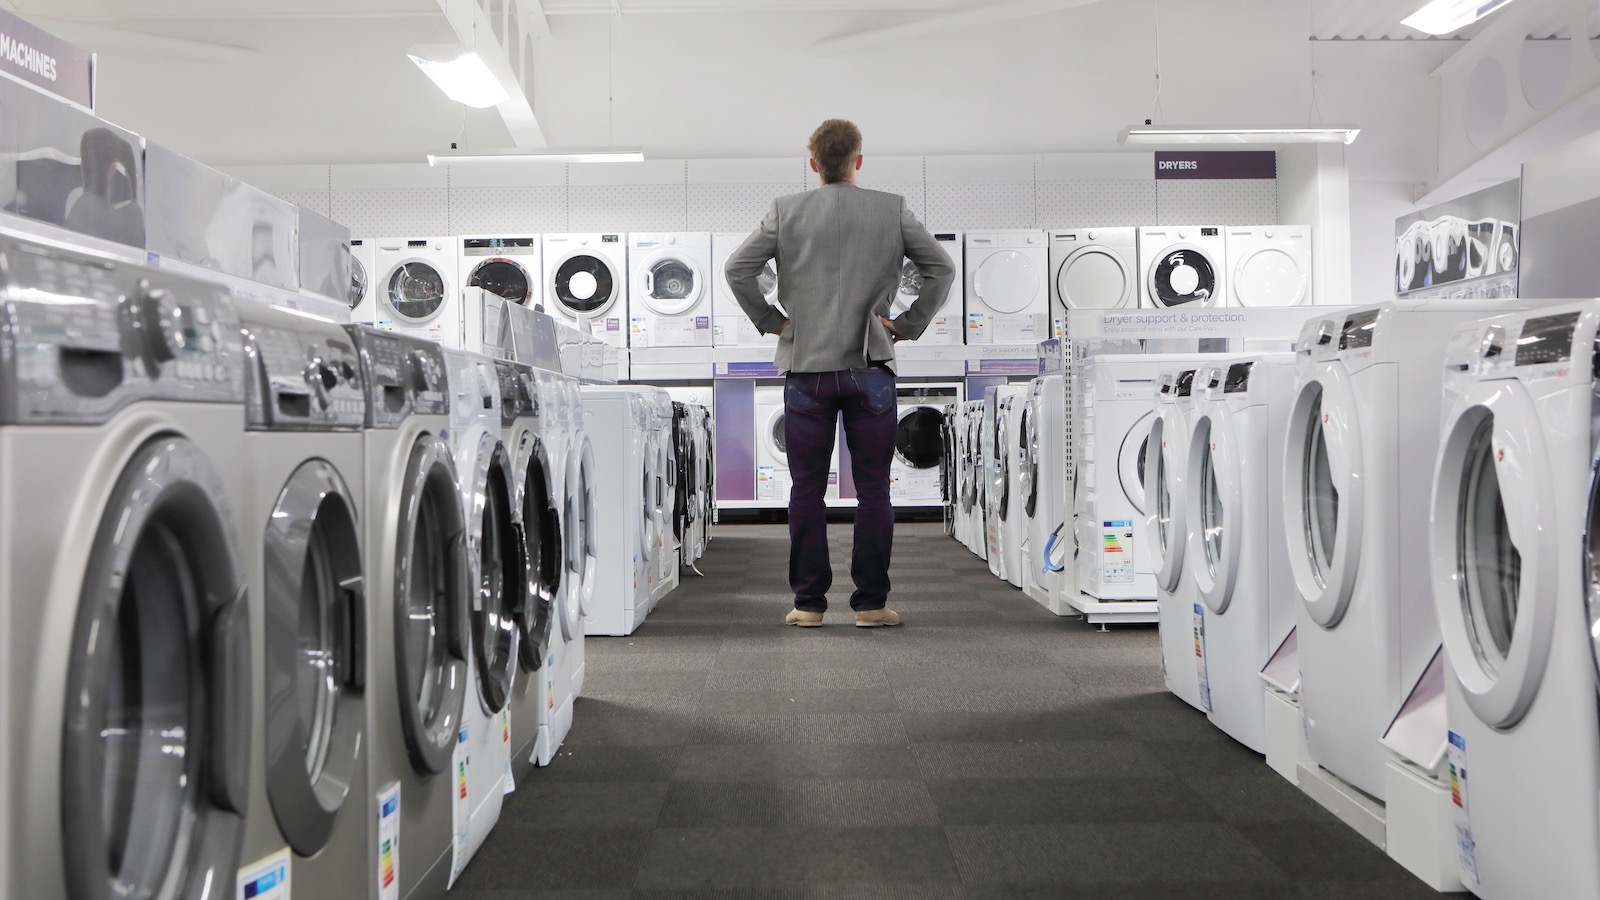 Here is the Best Time to Buy Appliances like Washer/Dryers